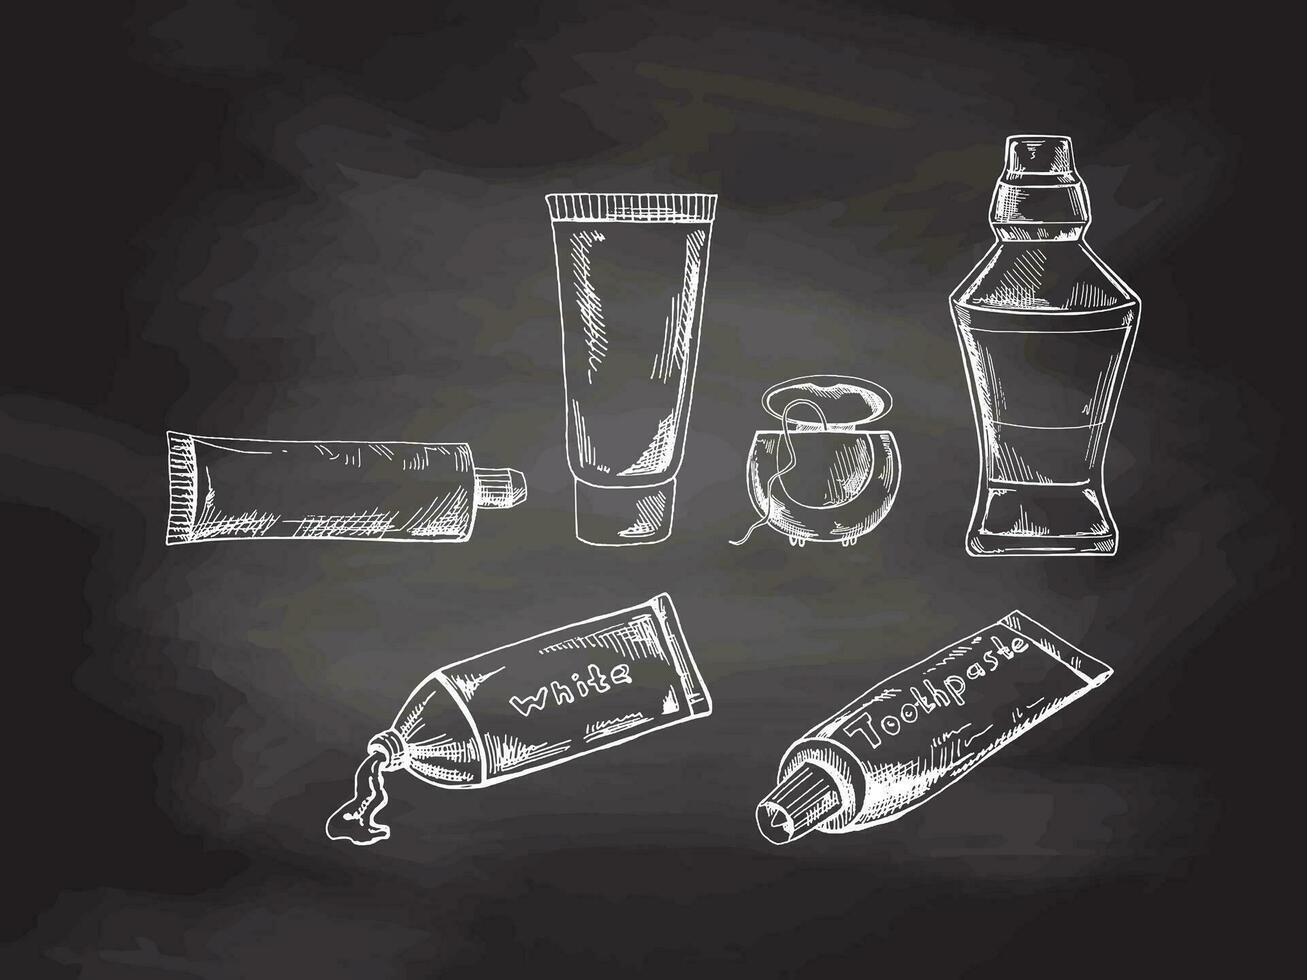 Stomatology hand drawn set on chalkboard background. Toothache treatment. Toothpastes, dental floss, mouthwash. Dental care. vector